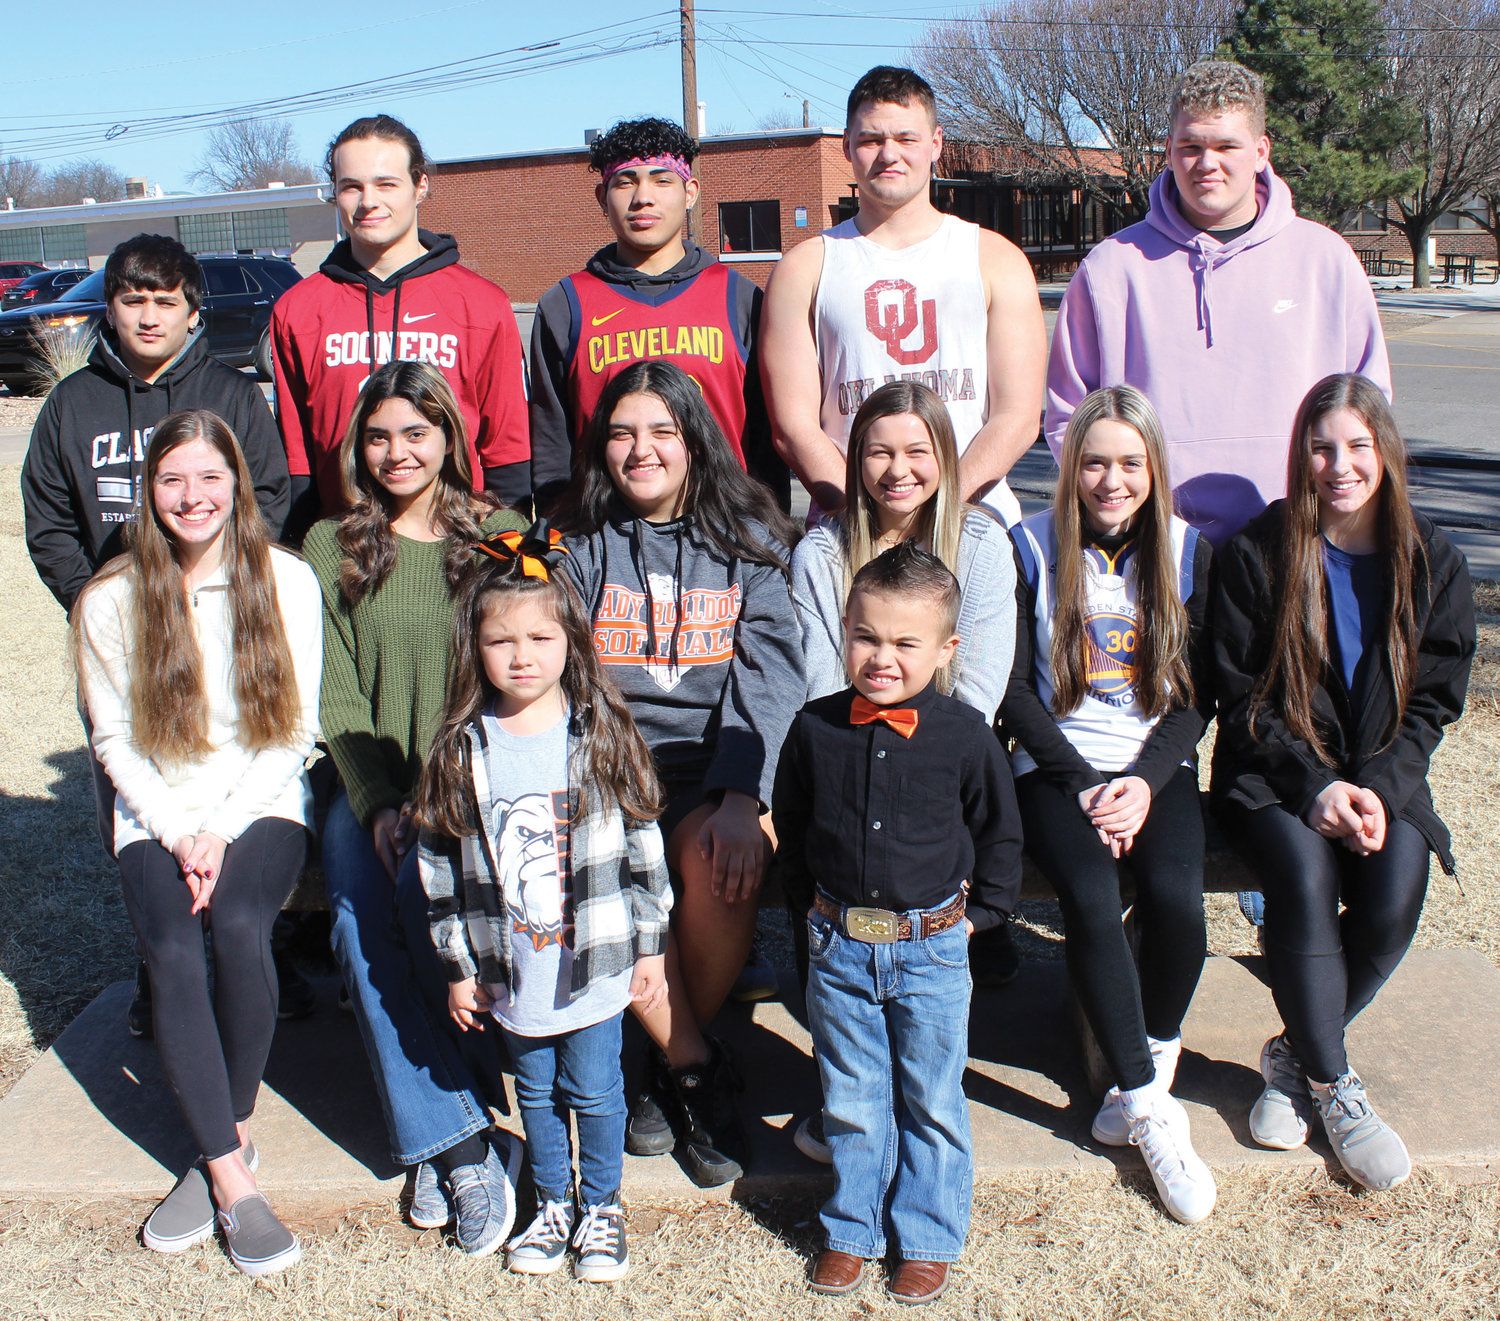 Wayne High School’s basketball homecoming court are, seated from left, Haylee Durrence, Lorensa Martinez, Mayce Trejo, Haiden Parker, McKenzie Fisher and Kaylee Madden. Standing from left are Junior Perez, Ethan Mullins, Dom Sampson, Brannon Lewelling and Andy Lee. In front are Hayslee Smith and Legend Adkins.